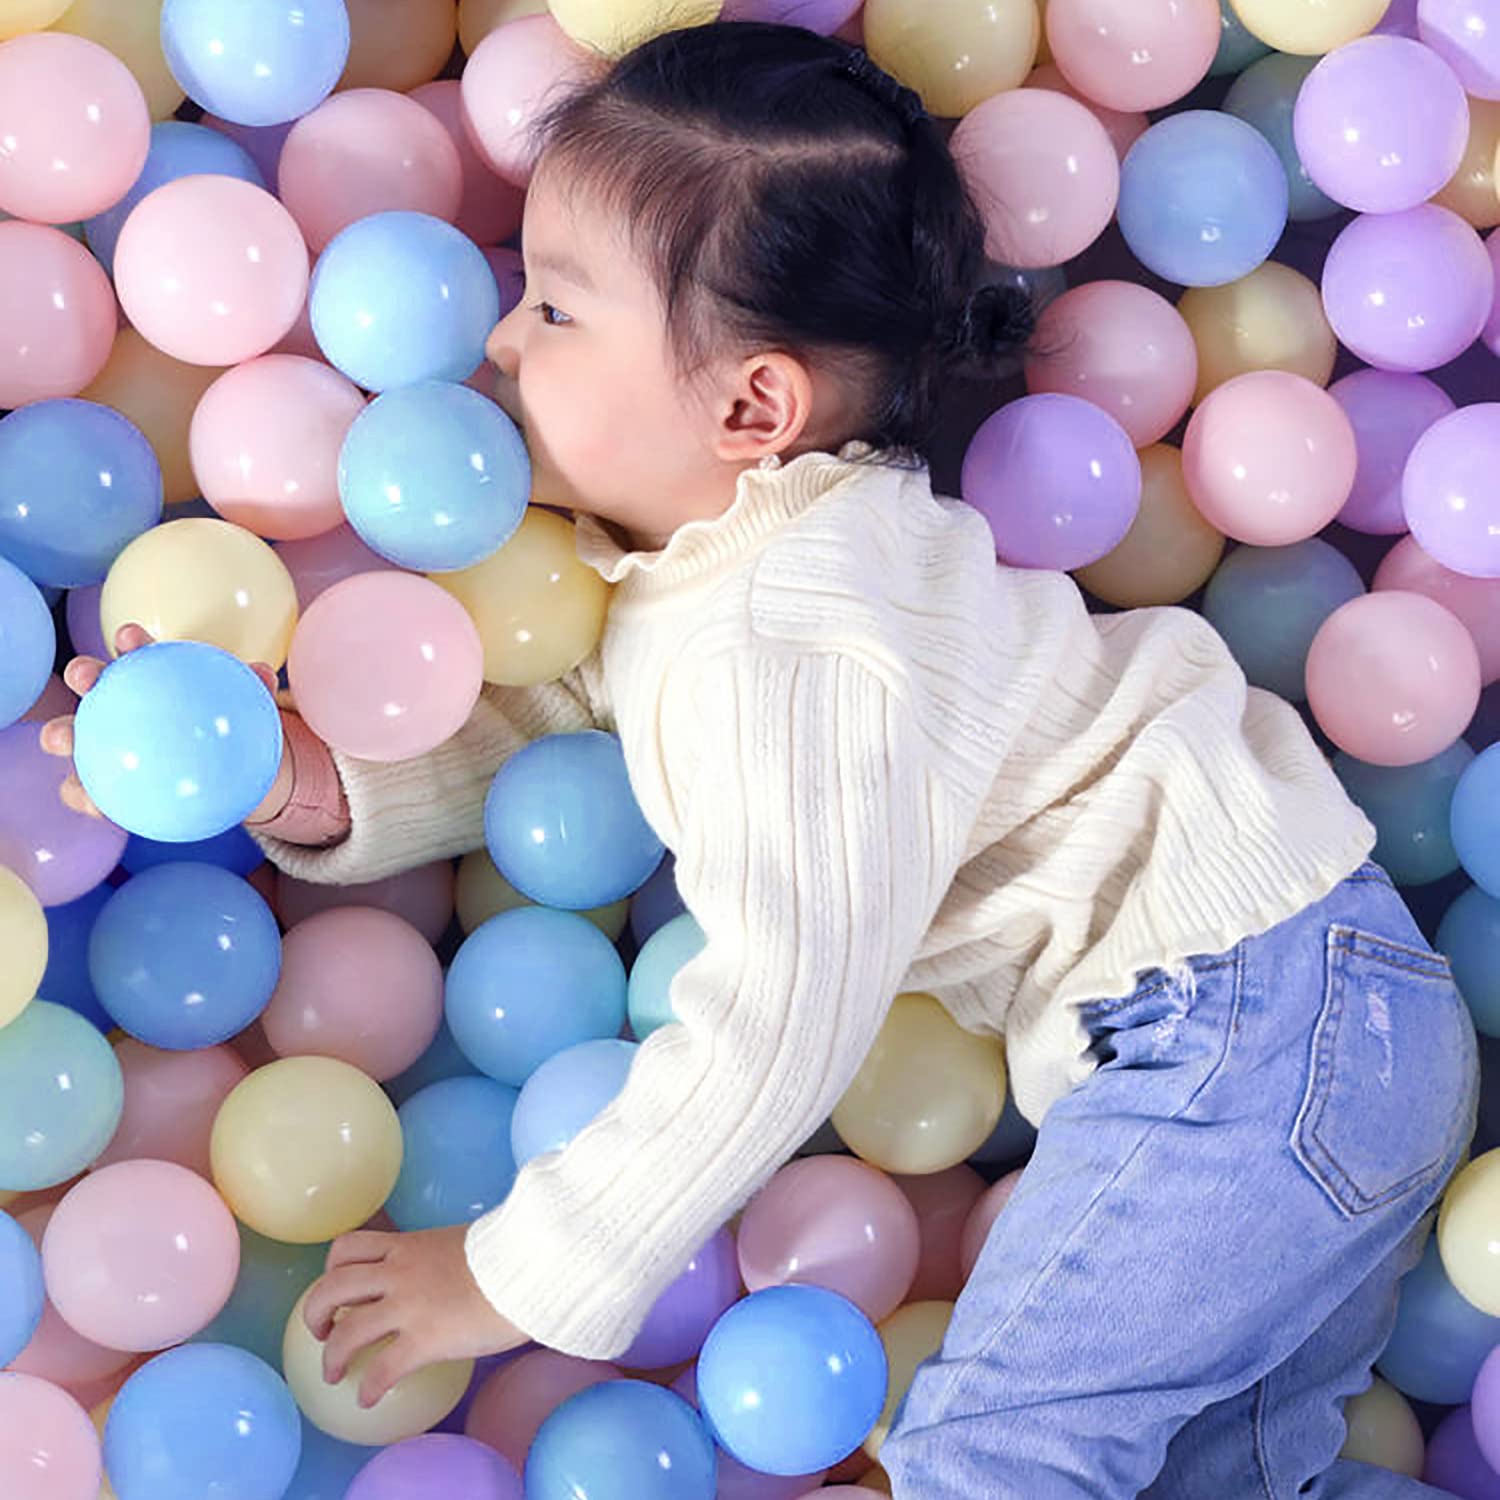 Babies Ball Pit Balls 170 BPA Free Ball Pool Balls for Swim Fun Toys,Non-Toxic Colorful Plastic Play Pit Balls For Baby Ball Pit,Toddlers Kids Birthday Party Decoration Tent Tunnels Pit Balls ( 2.2